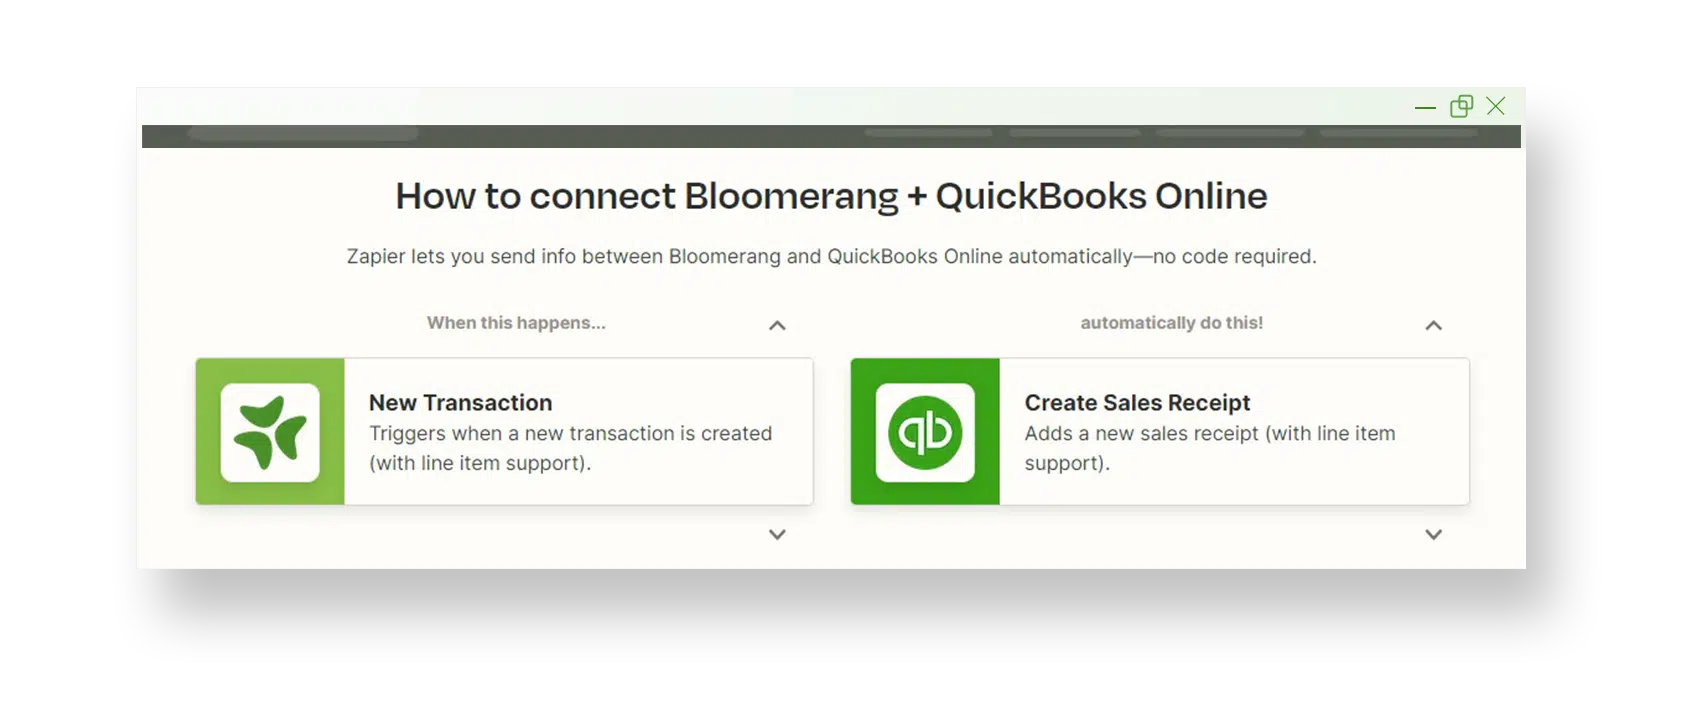 A window is shown using Zapier's software where Bloomerang and Quickbooks Online are connected through a 